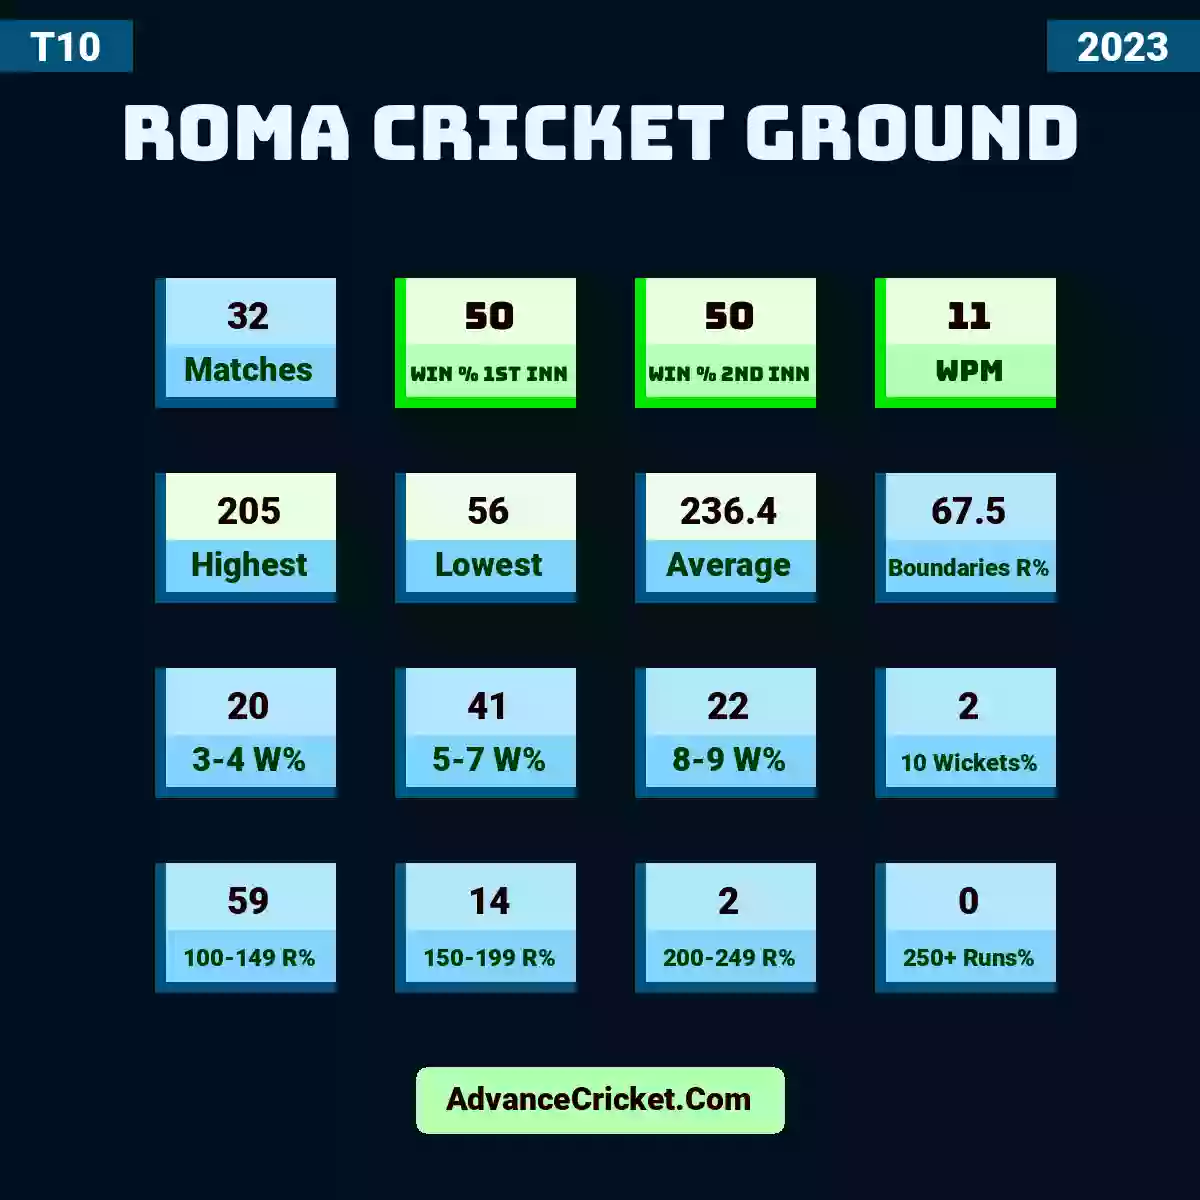 Image showing Roma Cricket Ground with Matches: 32, Win % 1st Inn: 50, Win % 2nd Inn: 50, WPM: 11, Highest: 205, Lowest: 56, Average: 236.4, Boundaries R%: 67.5, 3-4 W%: 20, 5-7 W%: 41, 8-9 W%: 22, 10 Wickets%: 2, 100-149 R%: 59, 150-199 R%: 14, 200-249 R%: 2, 250+ Runs%: 0.